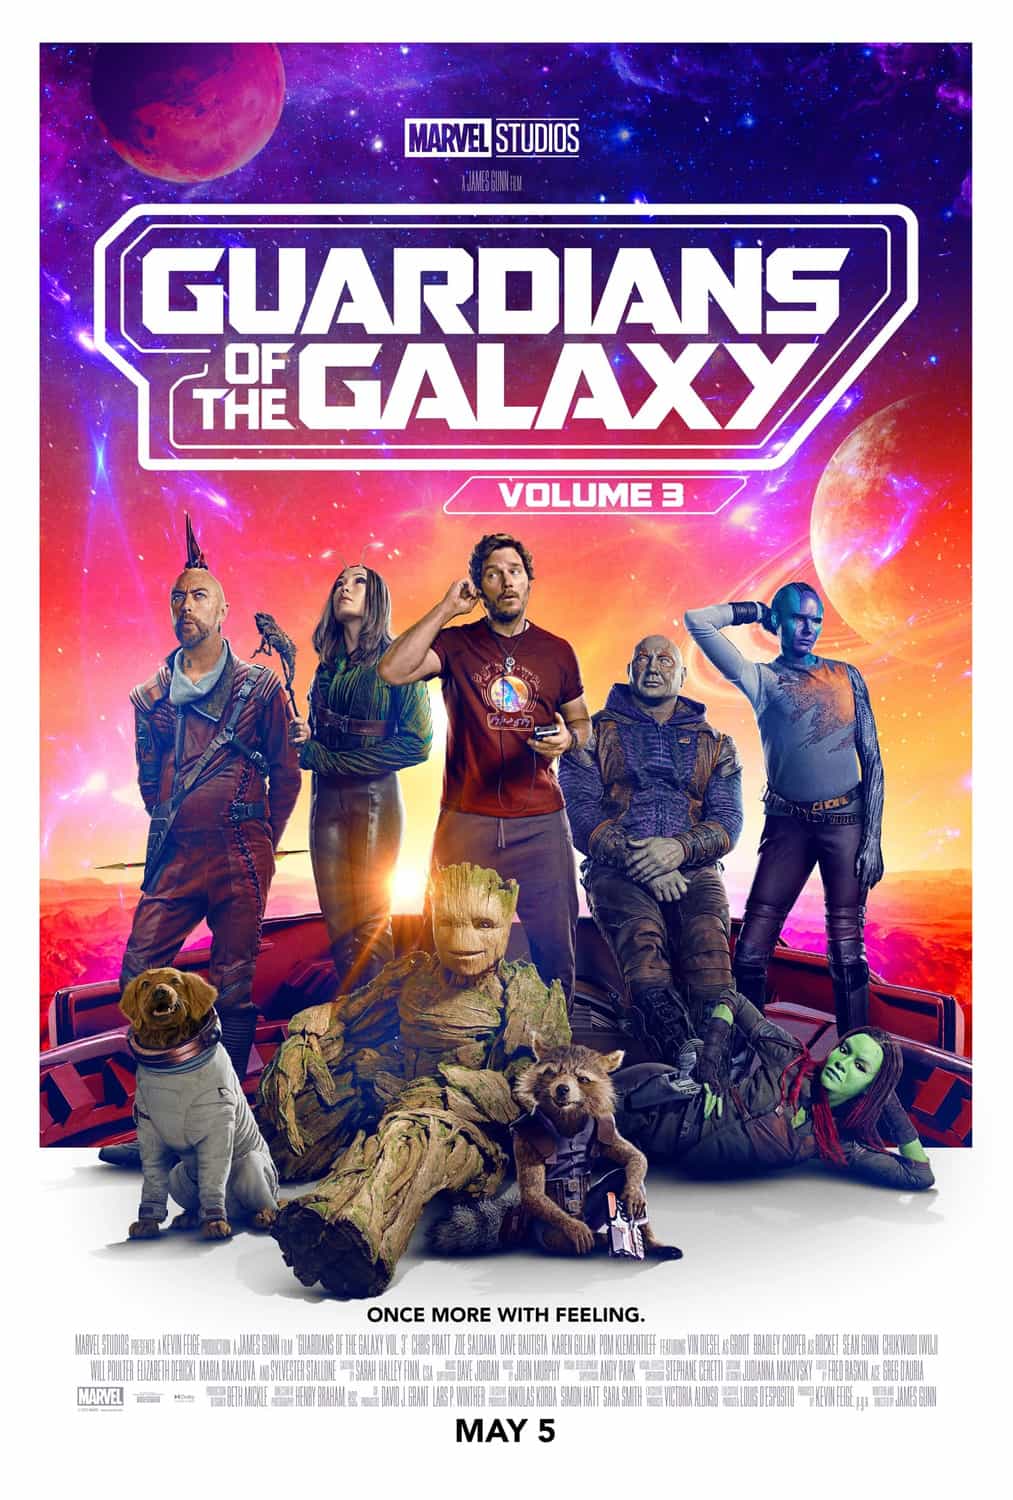 UK Box Office Weekend Report 5th - 7th May 2023:  Guardians of the Galaxy 3 tops the UK box office on its opening weekend with a debut gross over £12 Million